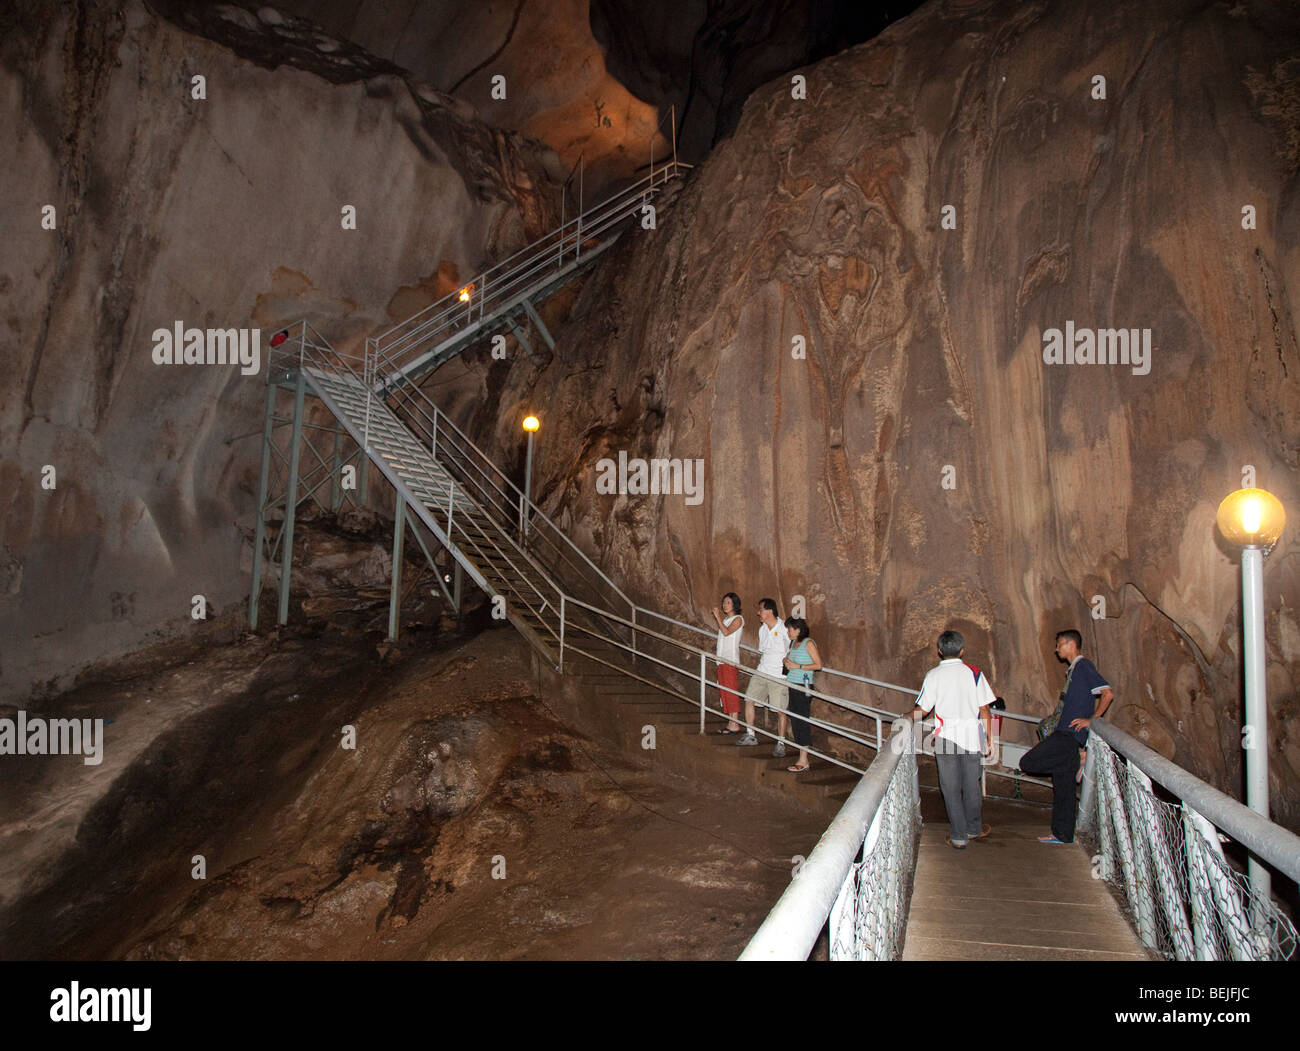 Gua Tempurung cave interior showing large stalacmite and tourists on walkways. Stock Photo